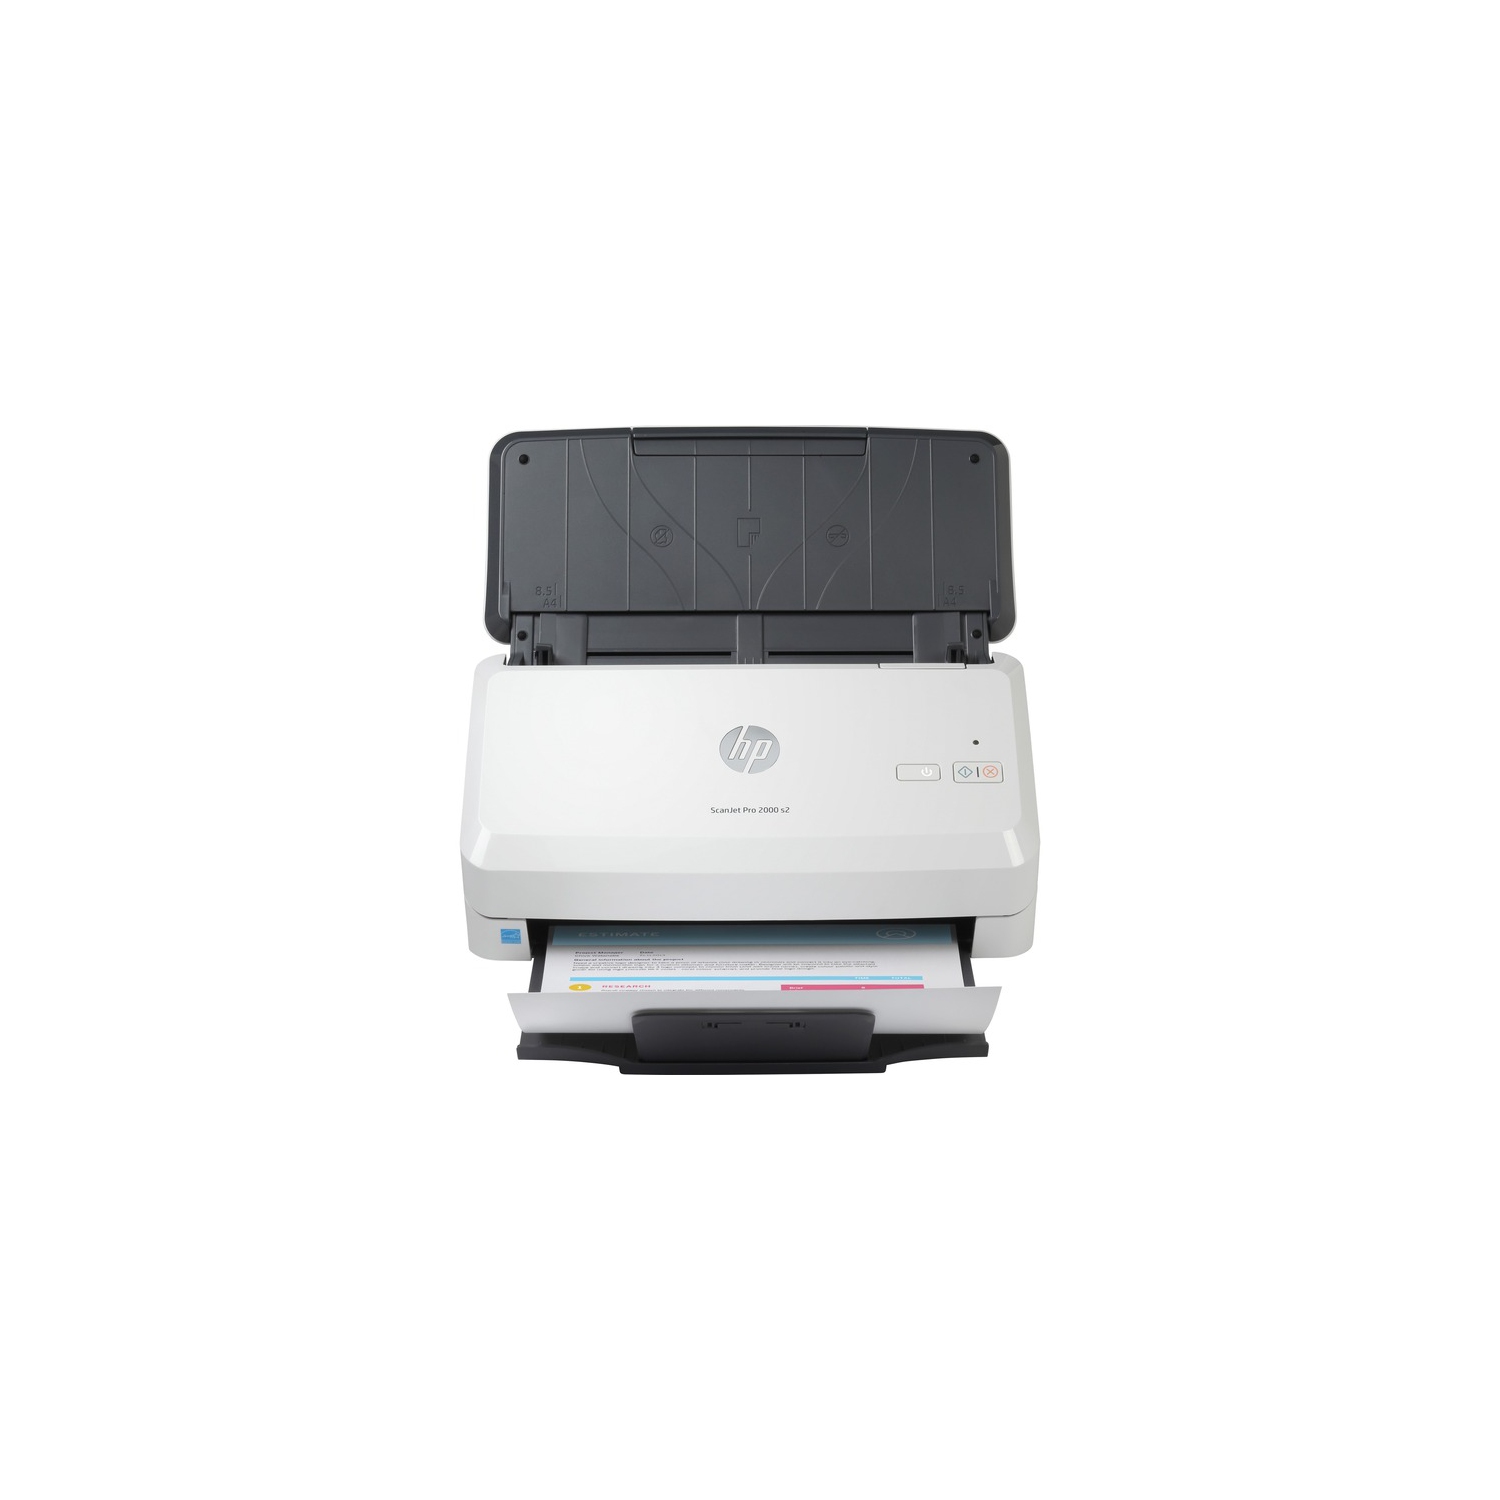 HP ScanJet Pro 2000 s2 Sheetfed Scanner 6FW06A#BGJ